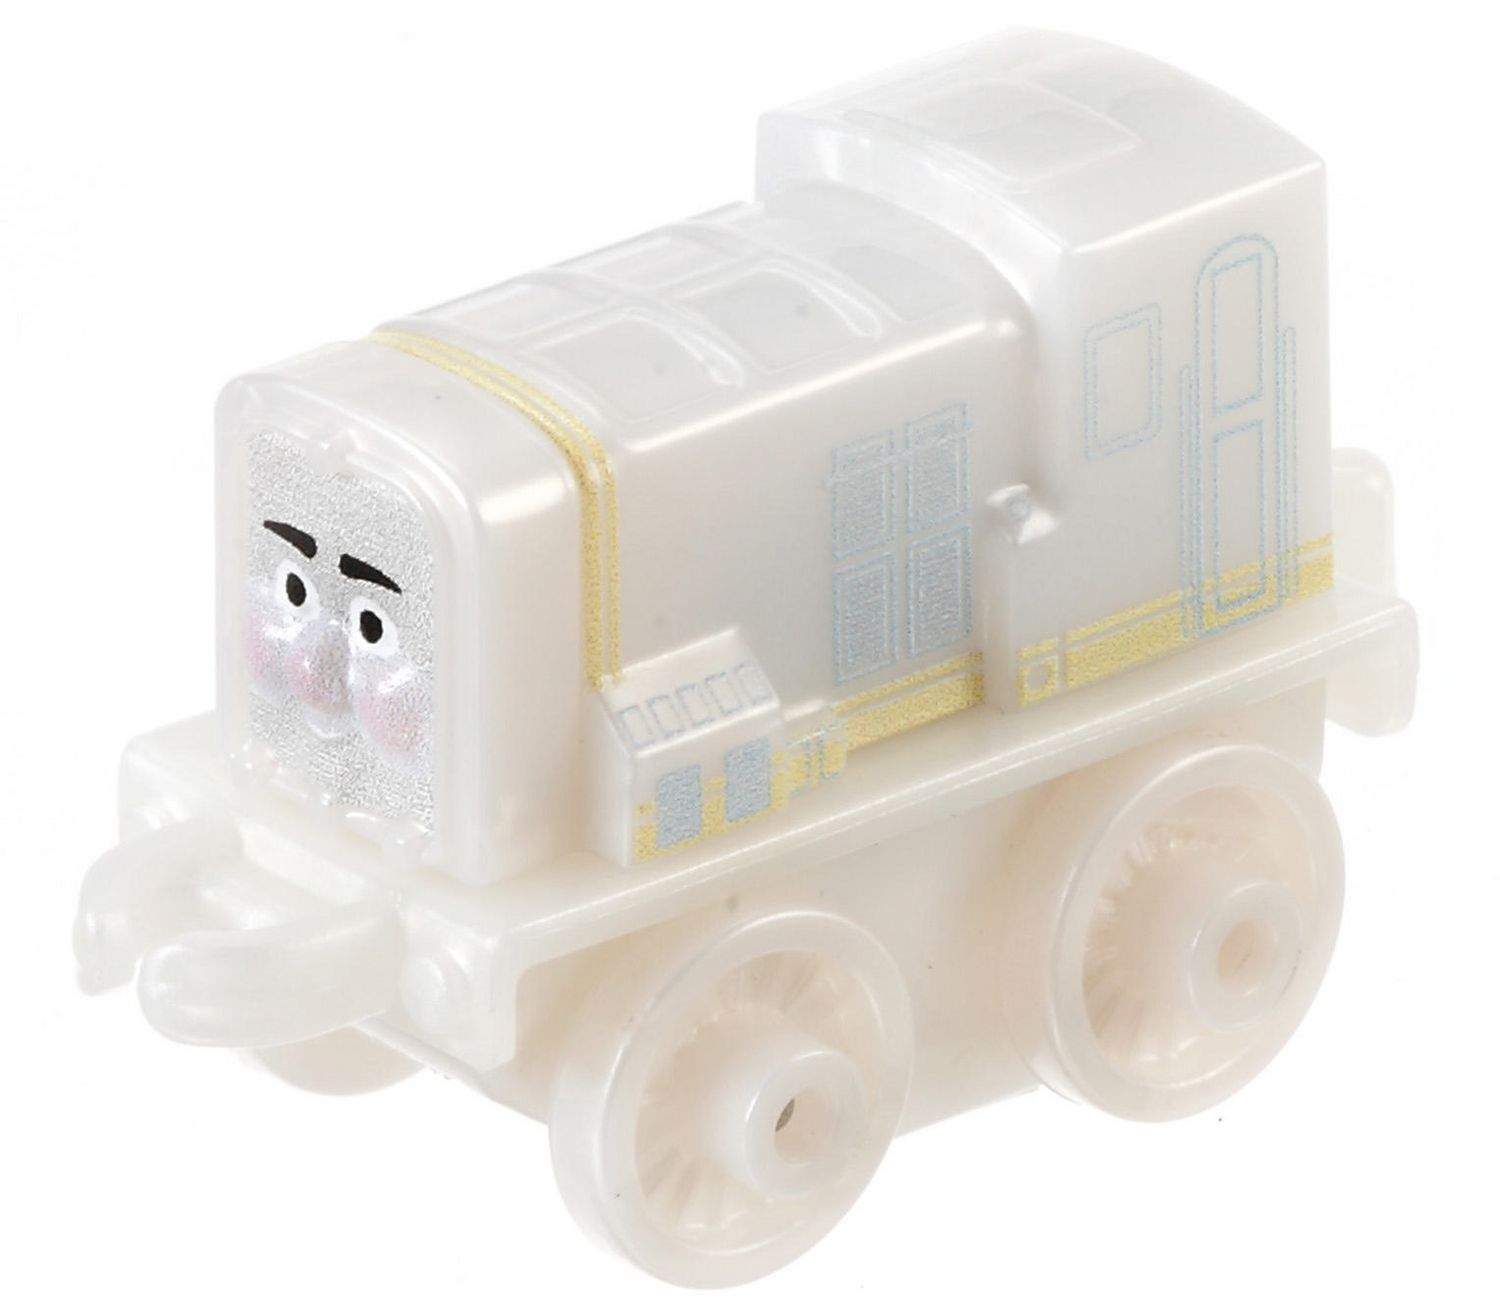 Details about   Thomas & Friends Minis GLOW PAXTON